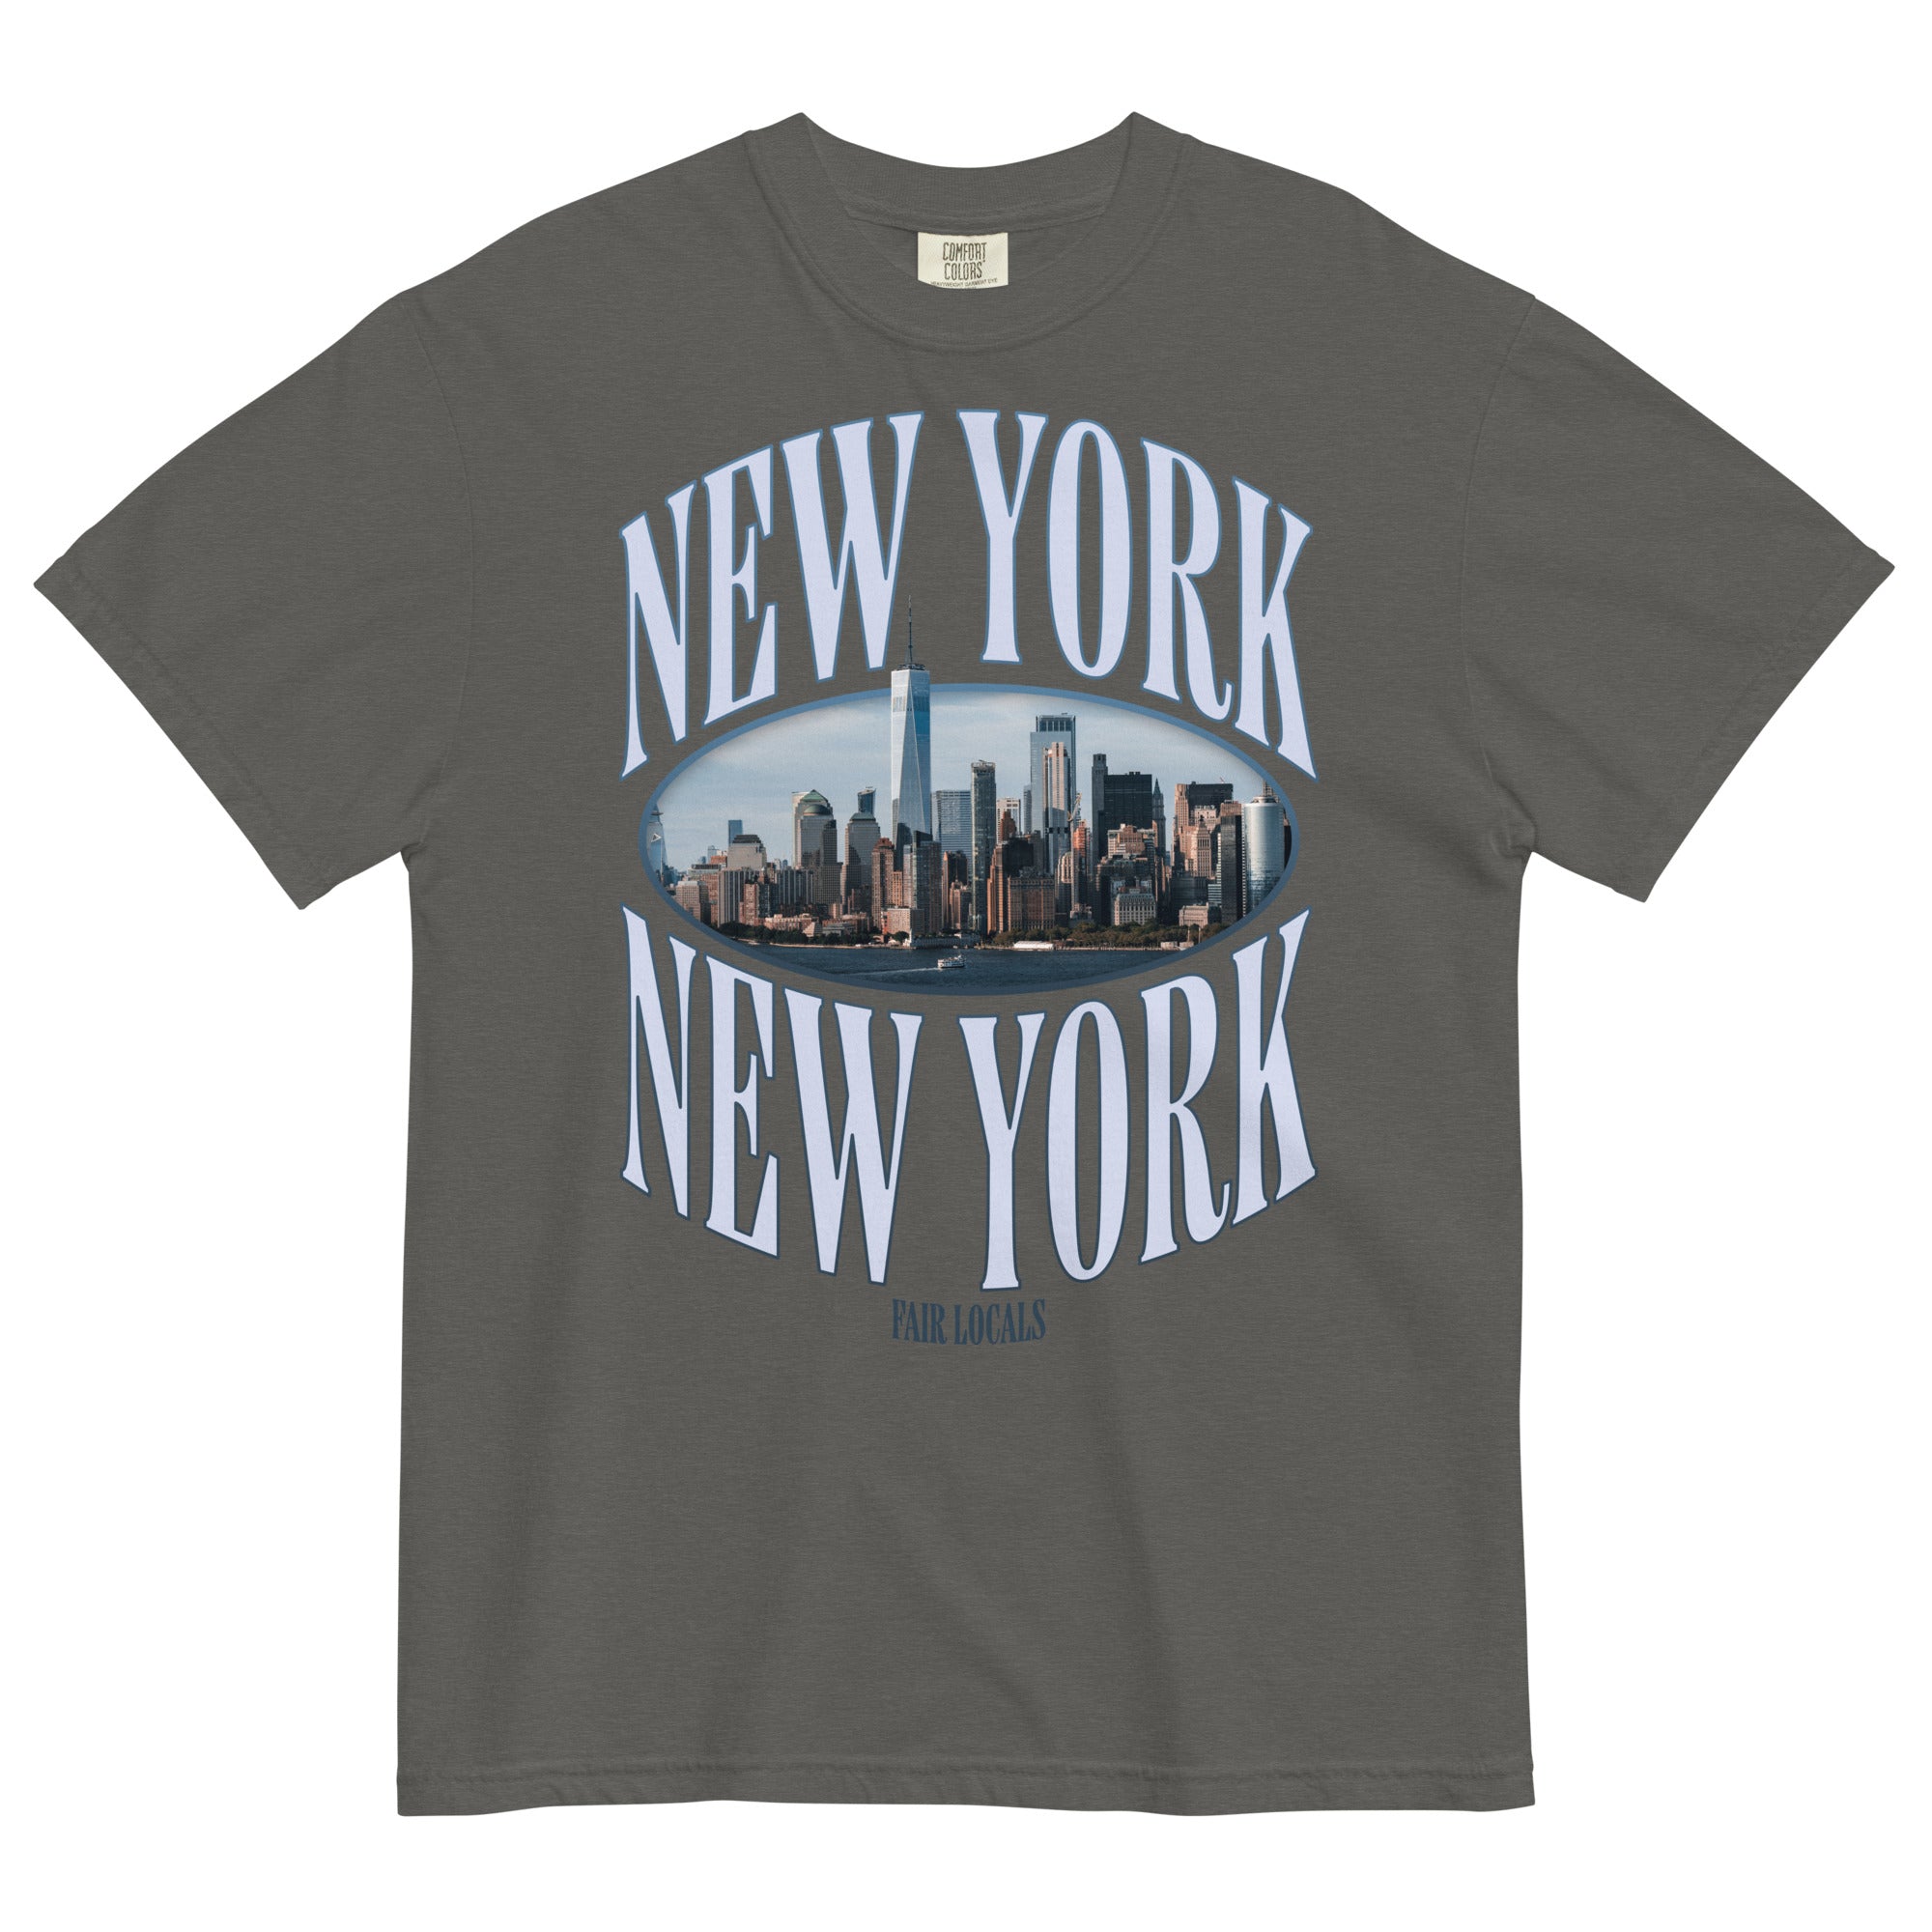 Vintage Relaxed Fit T-Shirt - New York, NY